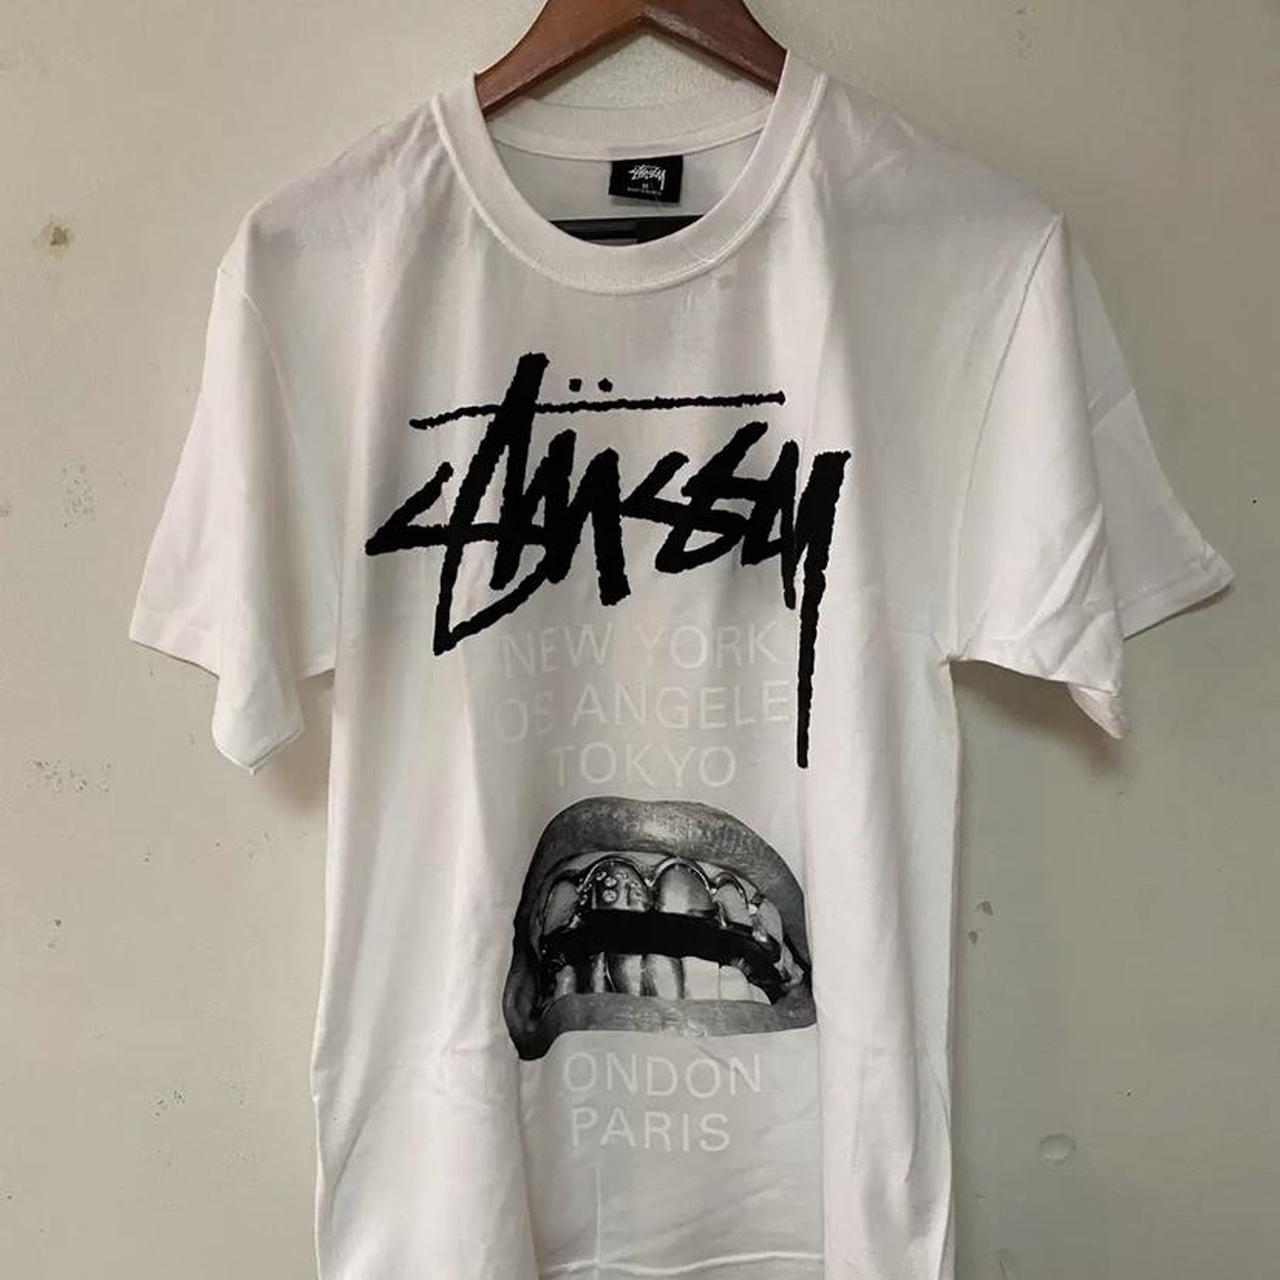 Stussy x rick owen extremely rare tee 🔥🔥 one of the... - Depop